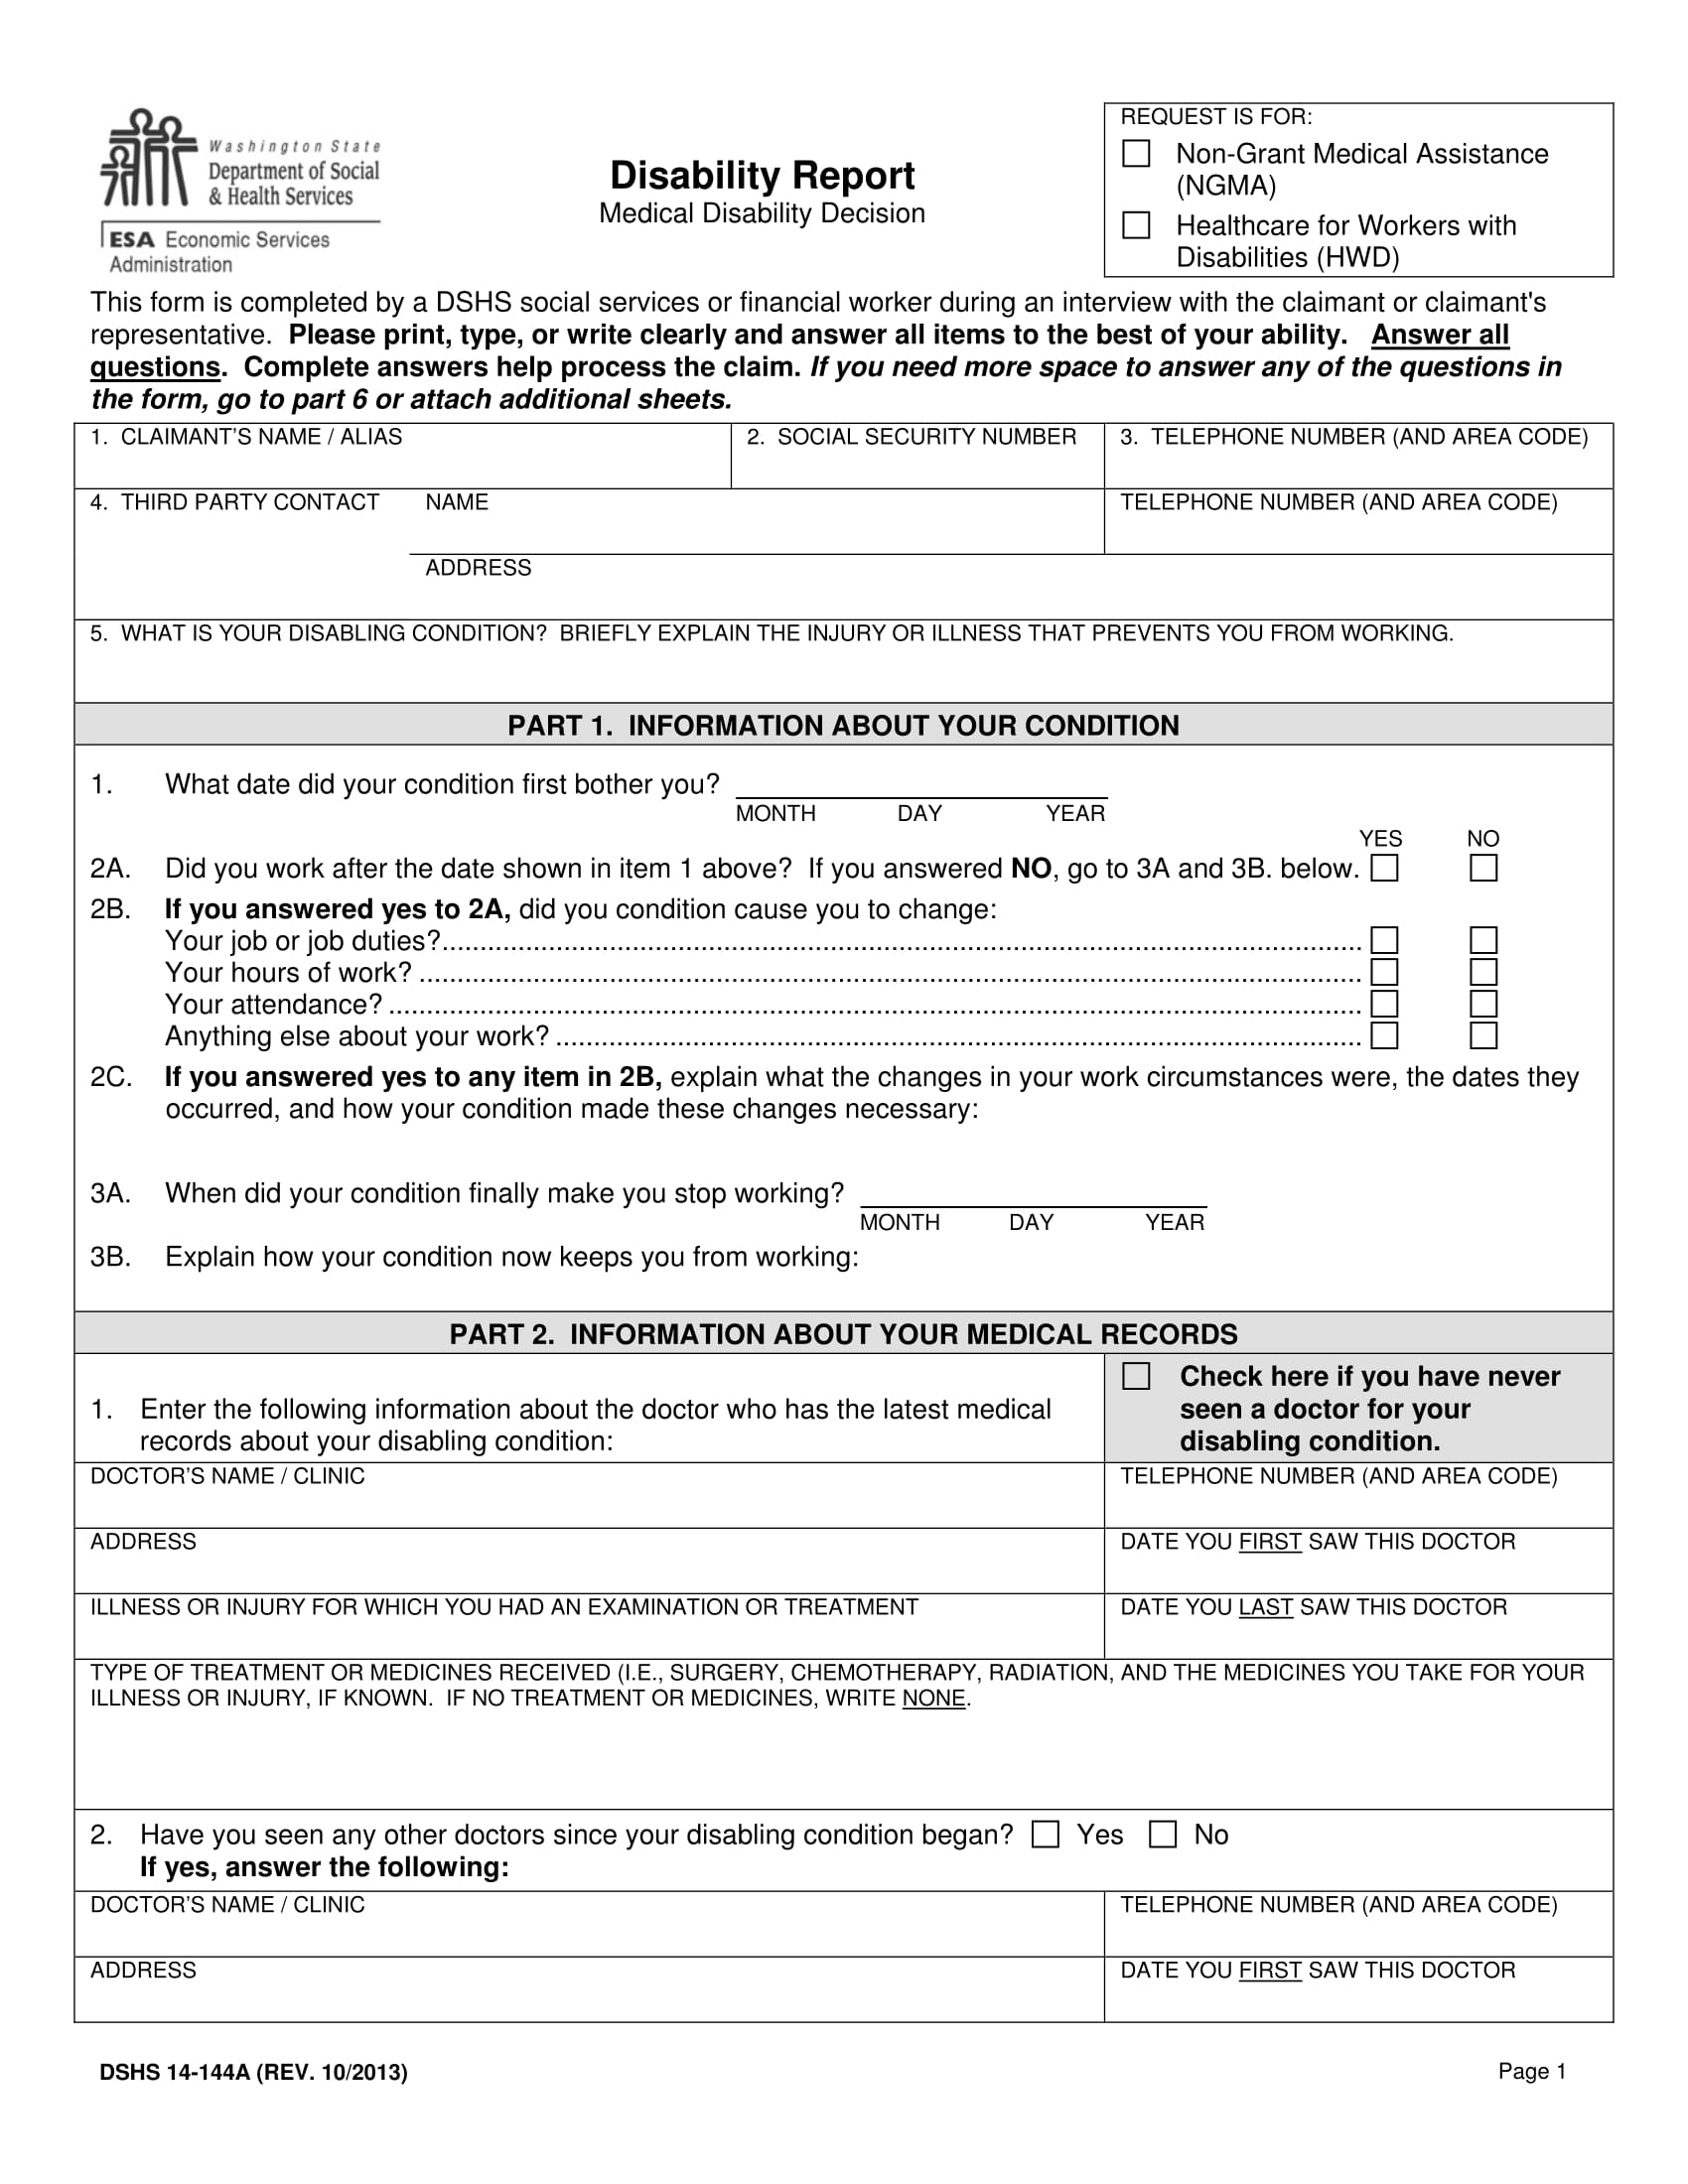 claimant’s disability report form 2